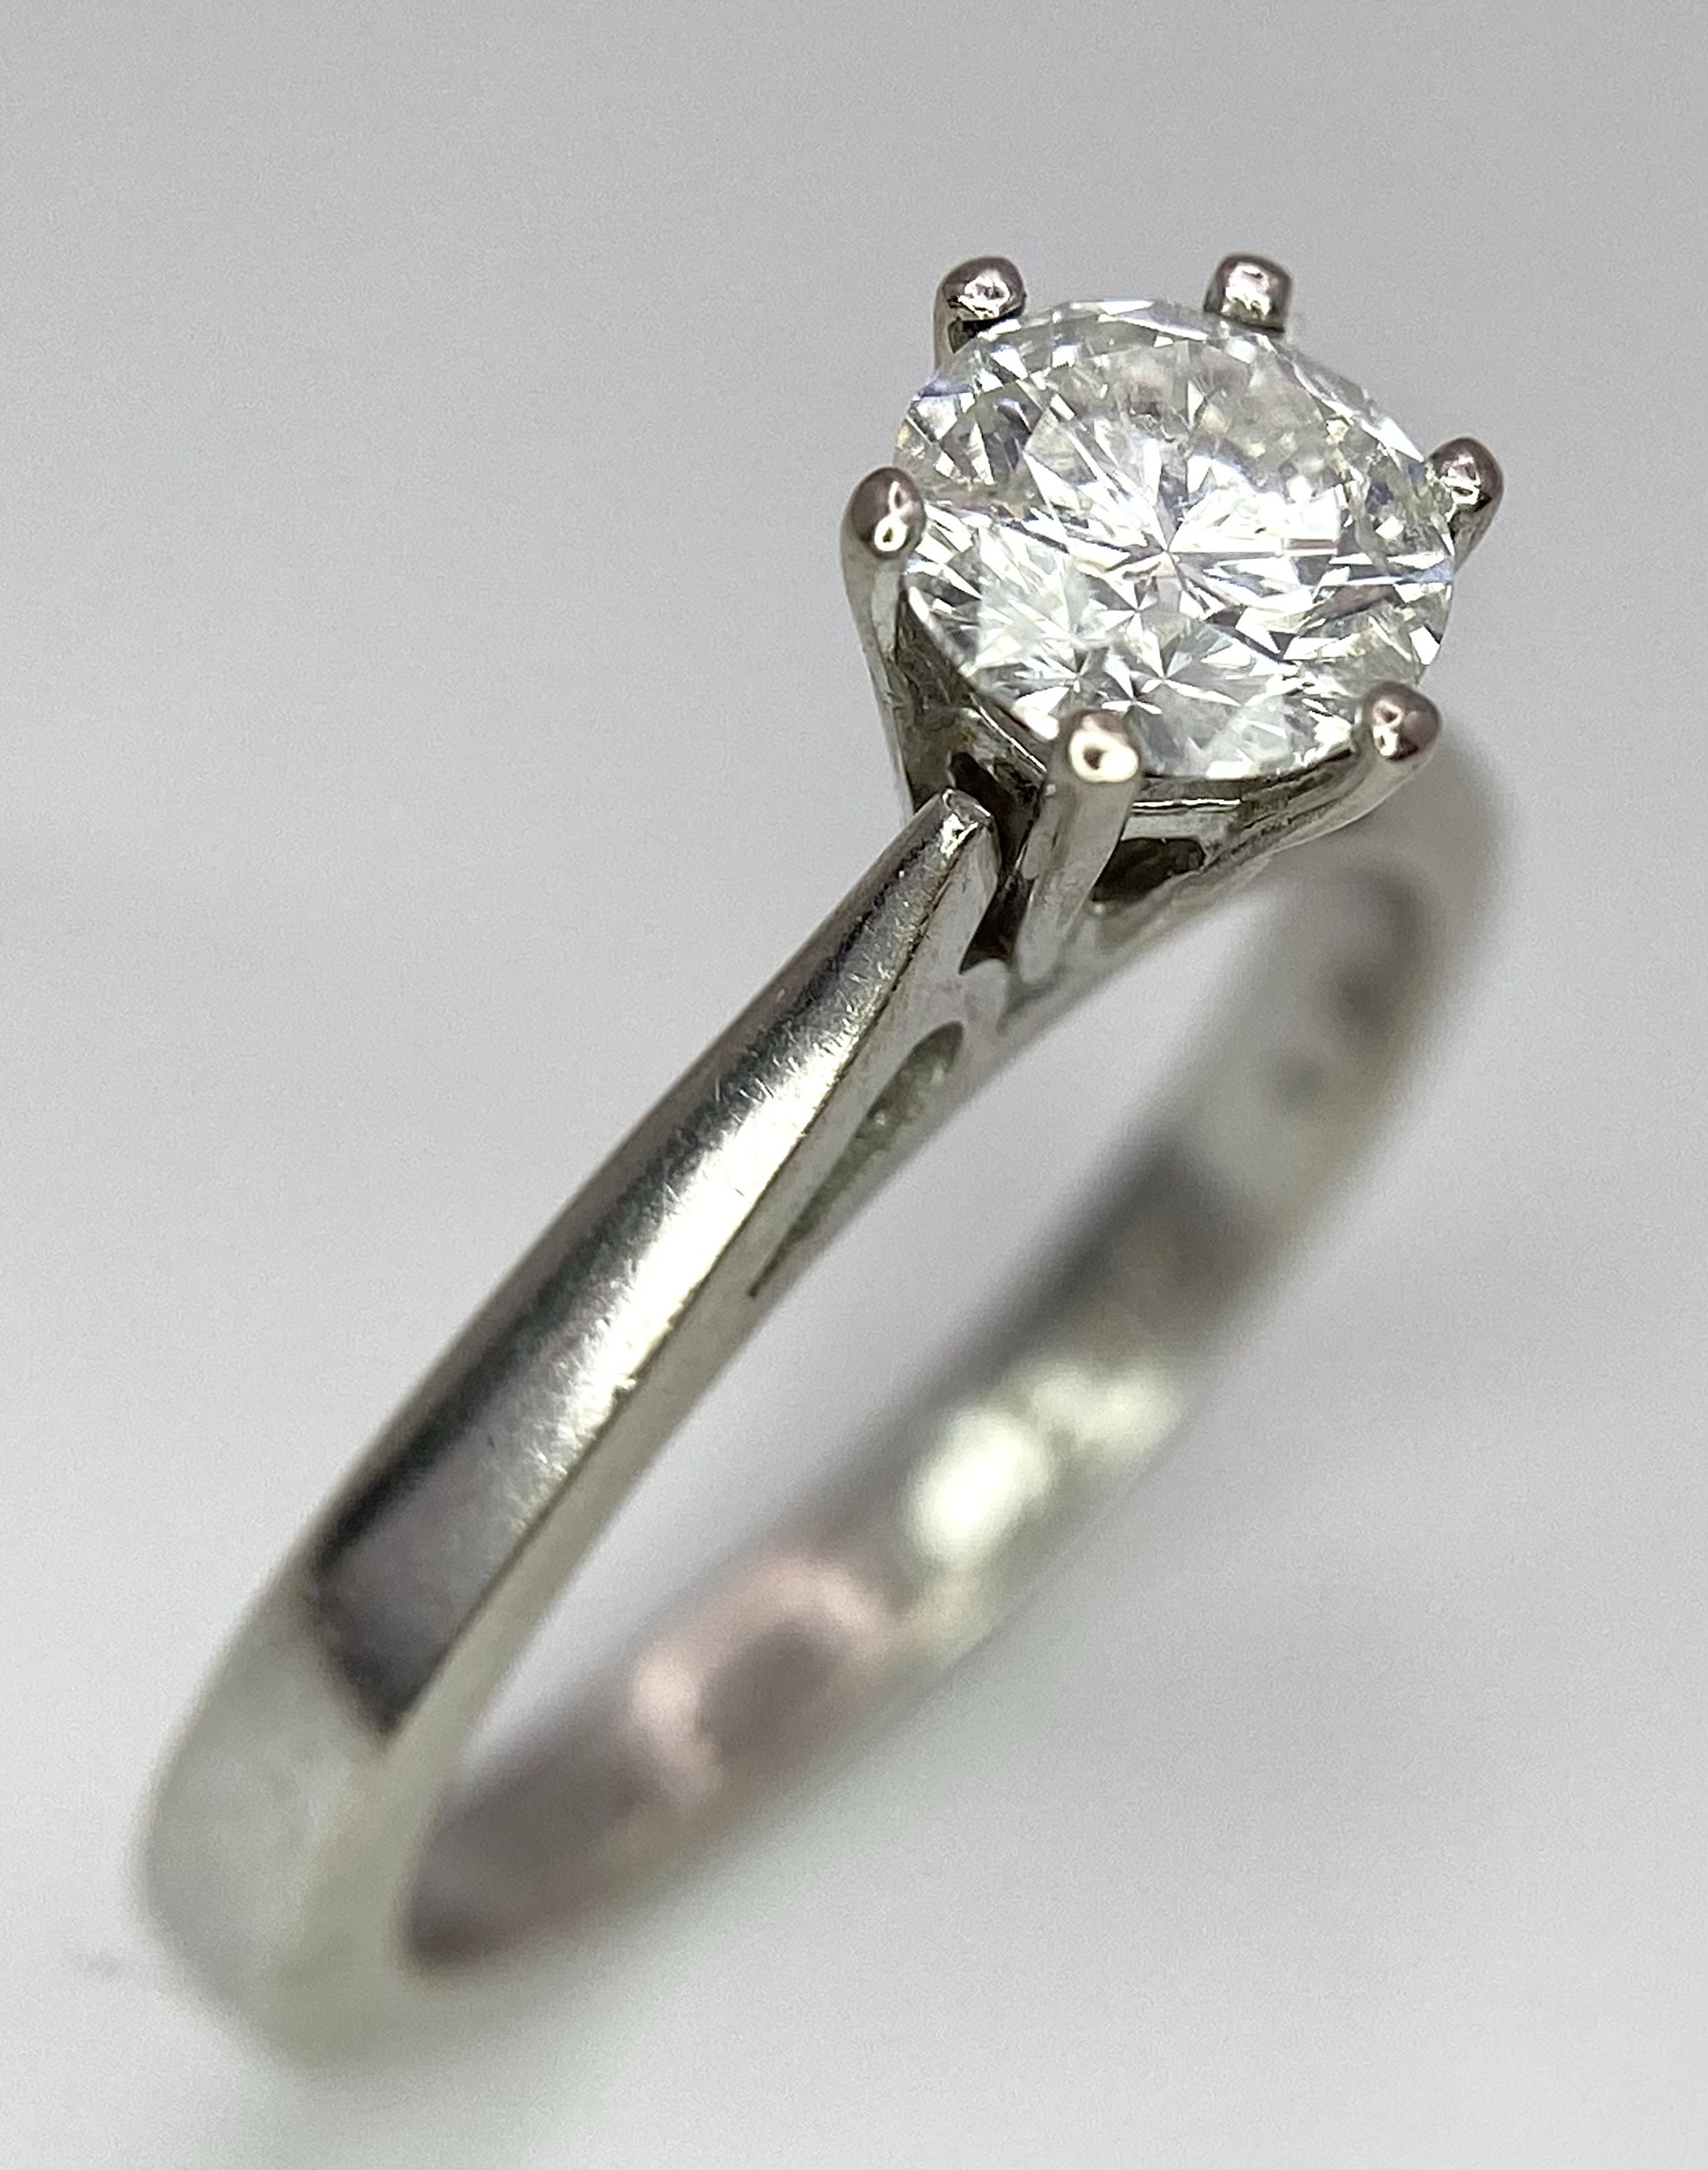 AN 18K WHITE GOLD DIAMOND SOLITAIRE RING - BRILLIANT ROUND CUT 0.70CT. 4.2G. SIZE M - Image 2 of 9